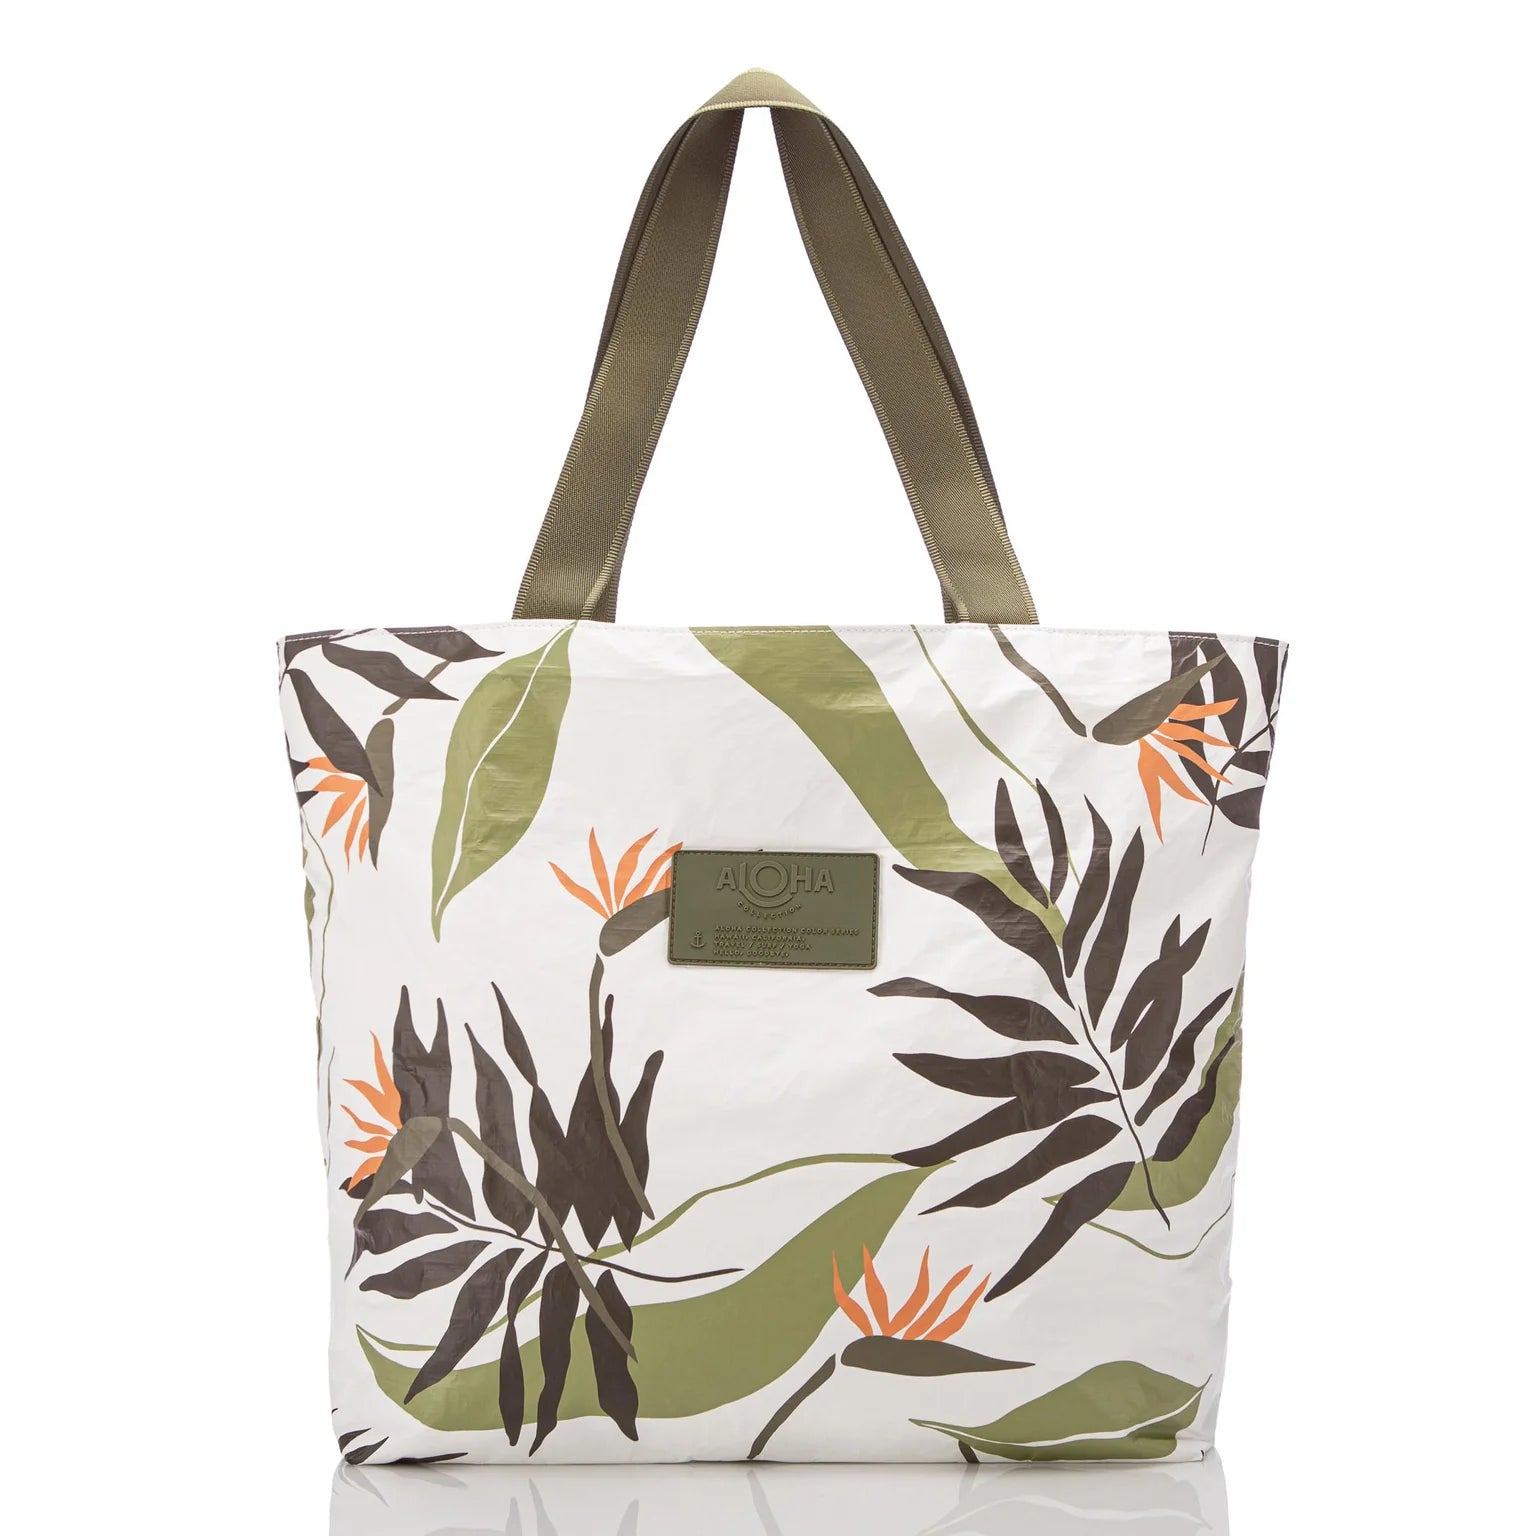 Painted Birds Day Tripper Tote